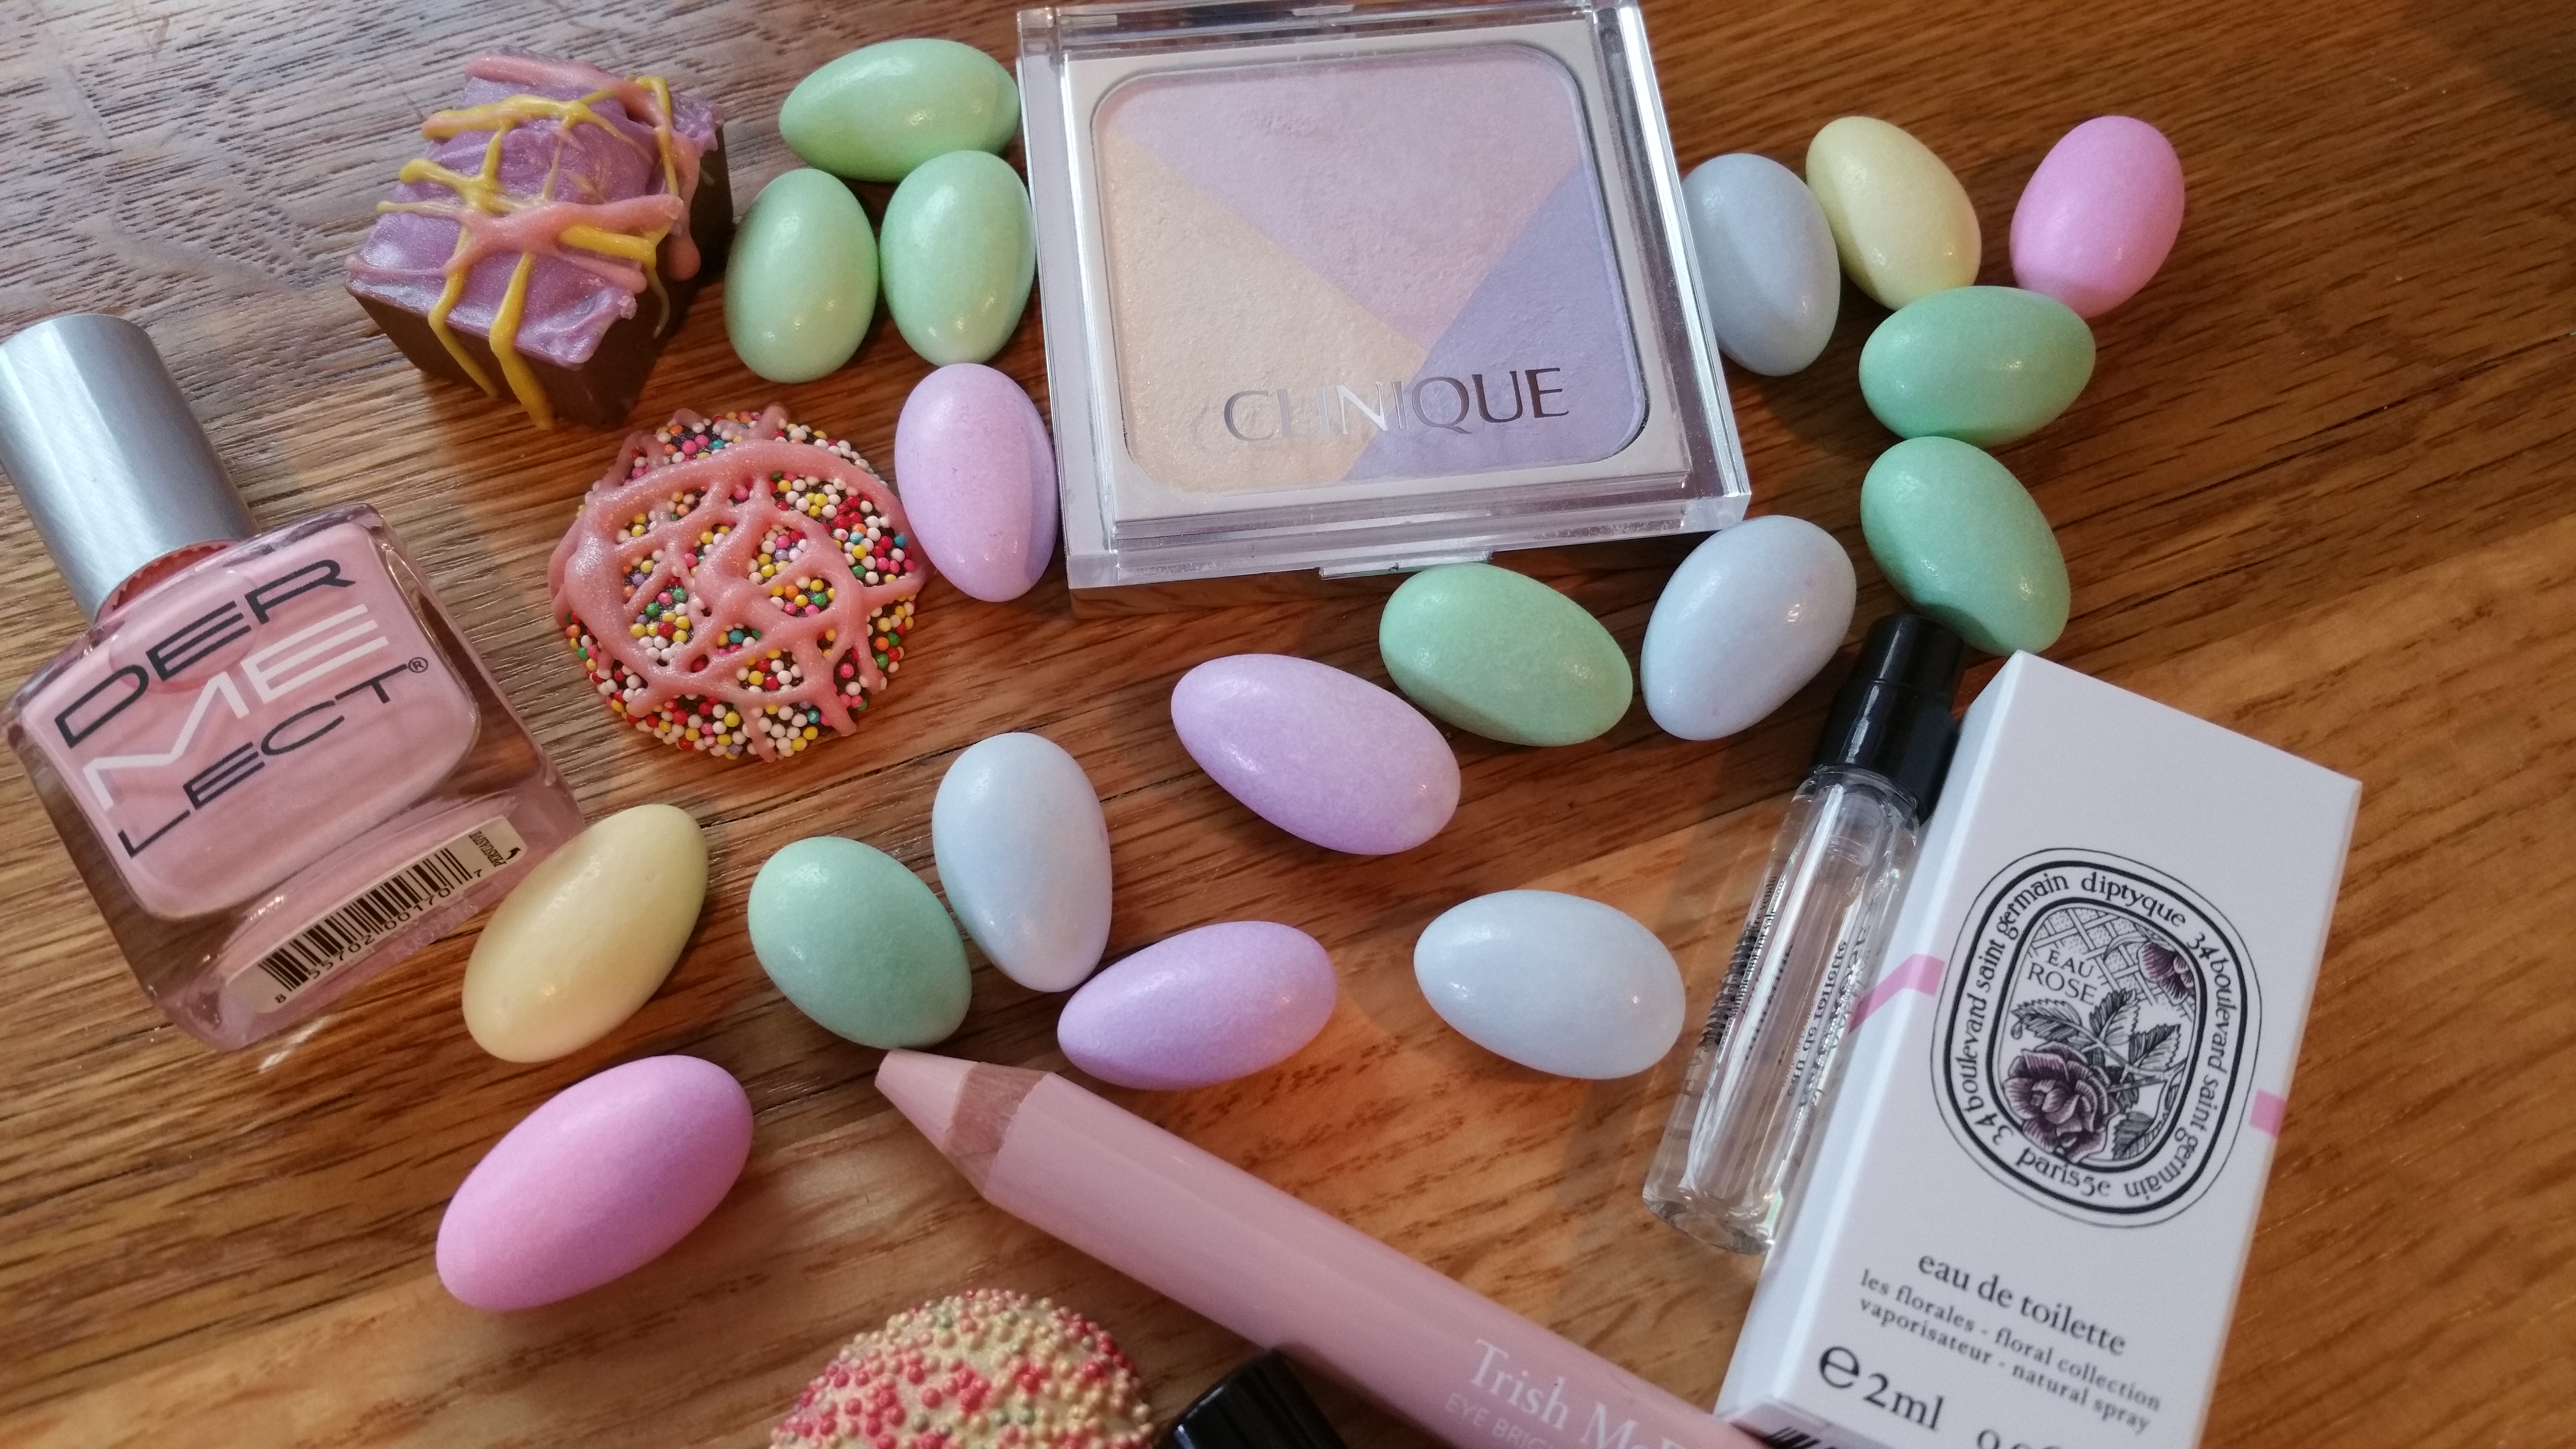 Clockwise from top Left: Dermelect Peptide Nail Polish - Persuasive Clinique Sculptionary Pallete, Defining Sugars, Diptyque EDT Eau Rose, Trish McEvoy Eye Brightener - Shell